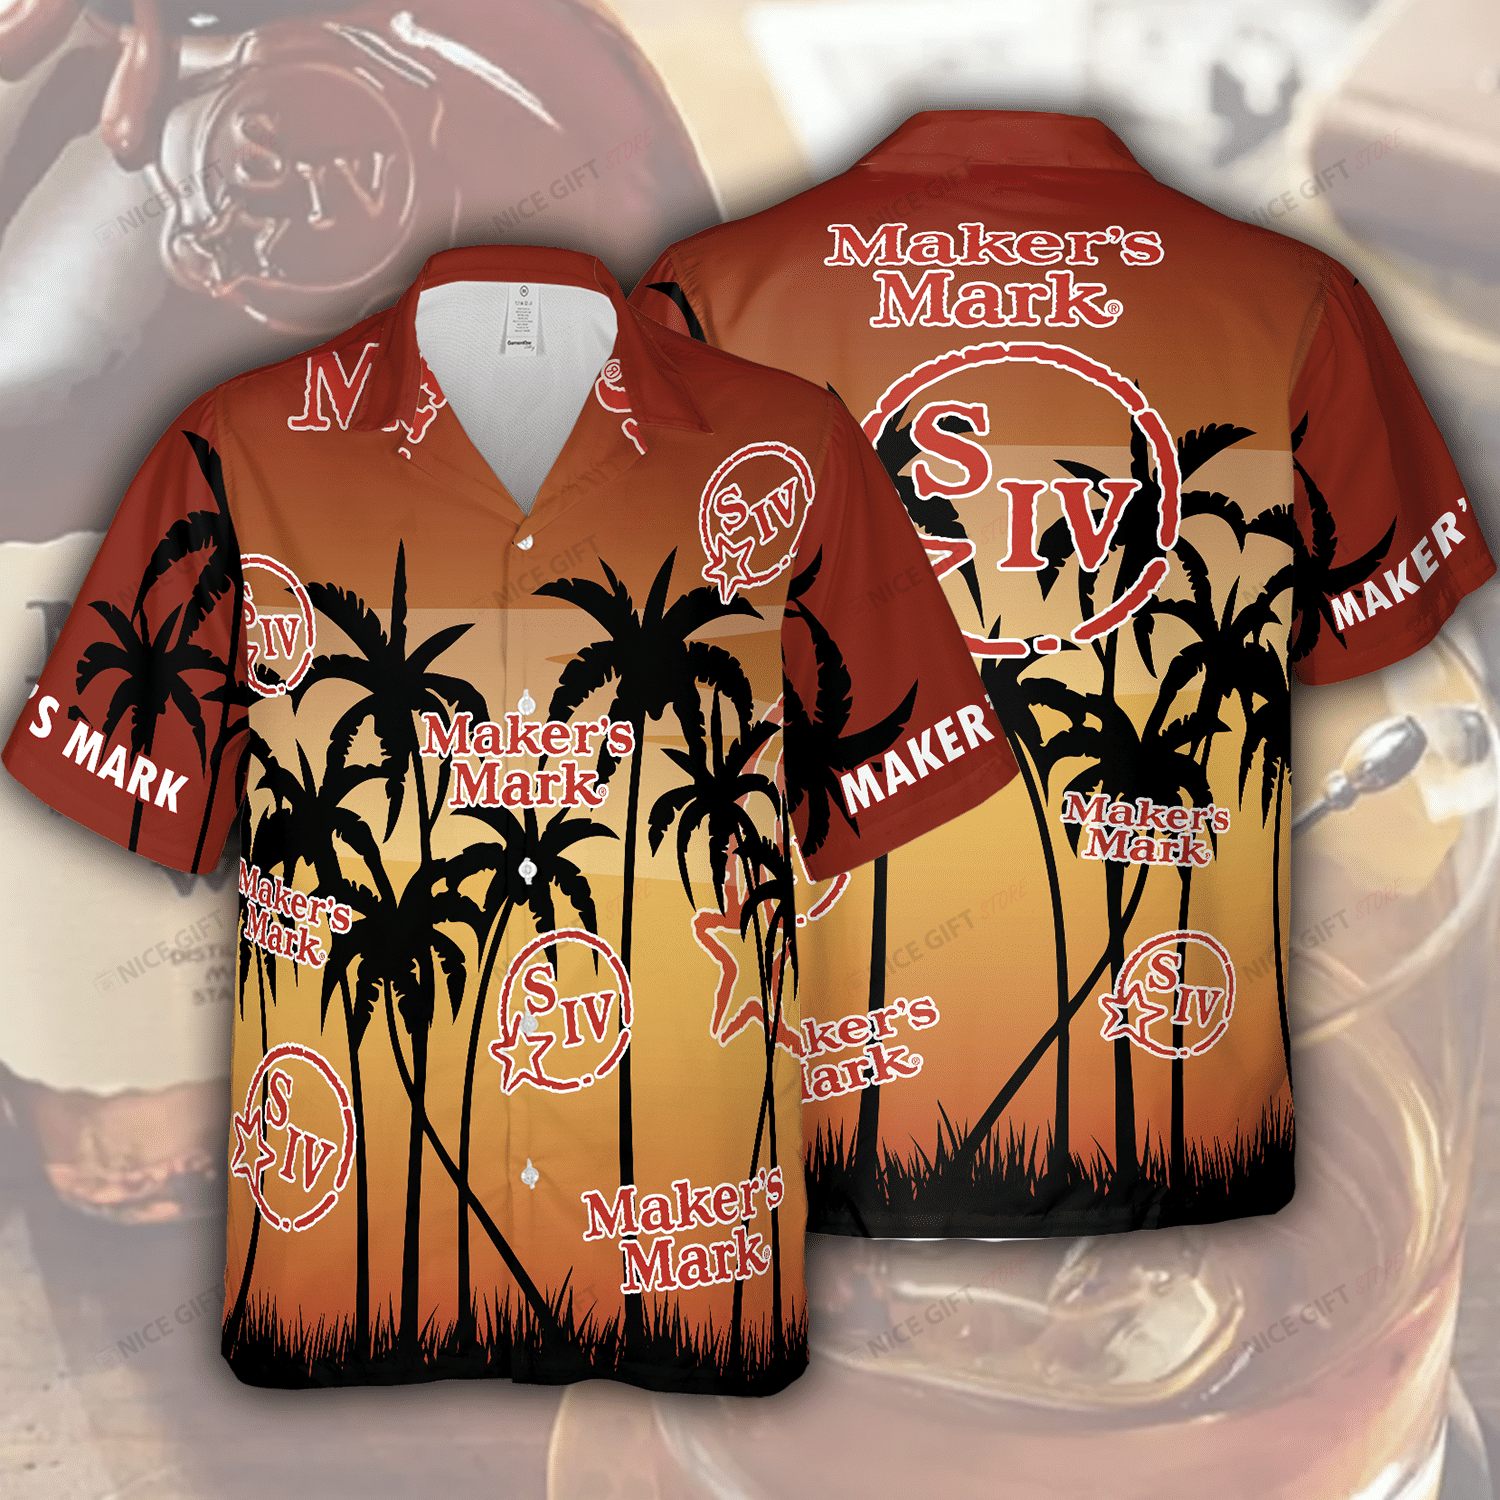 There are several types of Hawaiian shirts available on the market 153